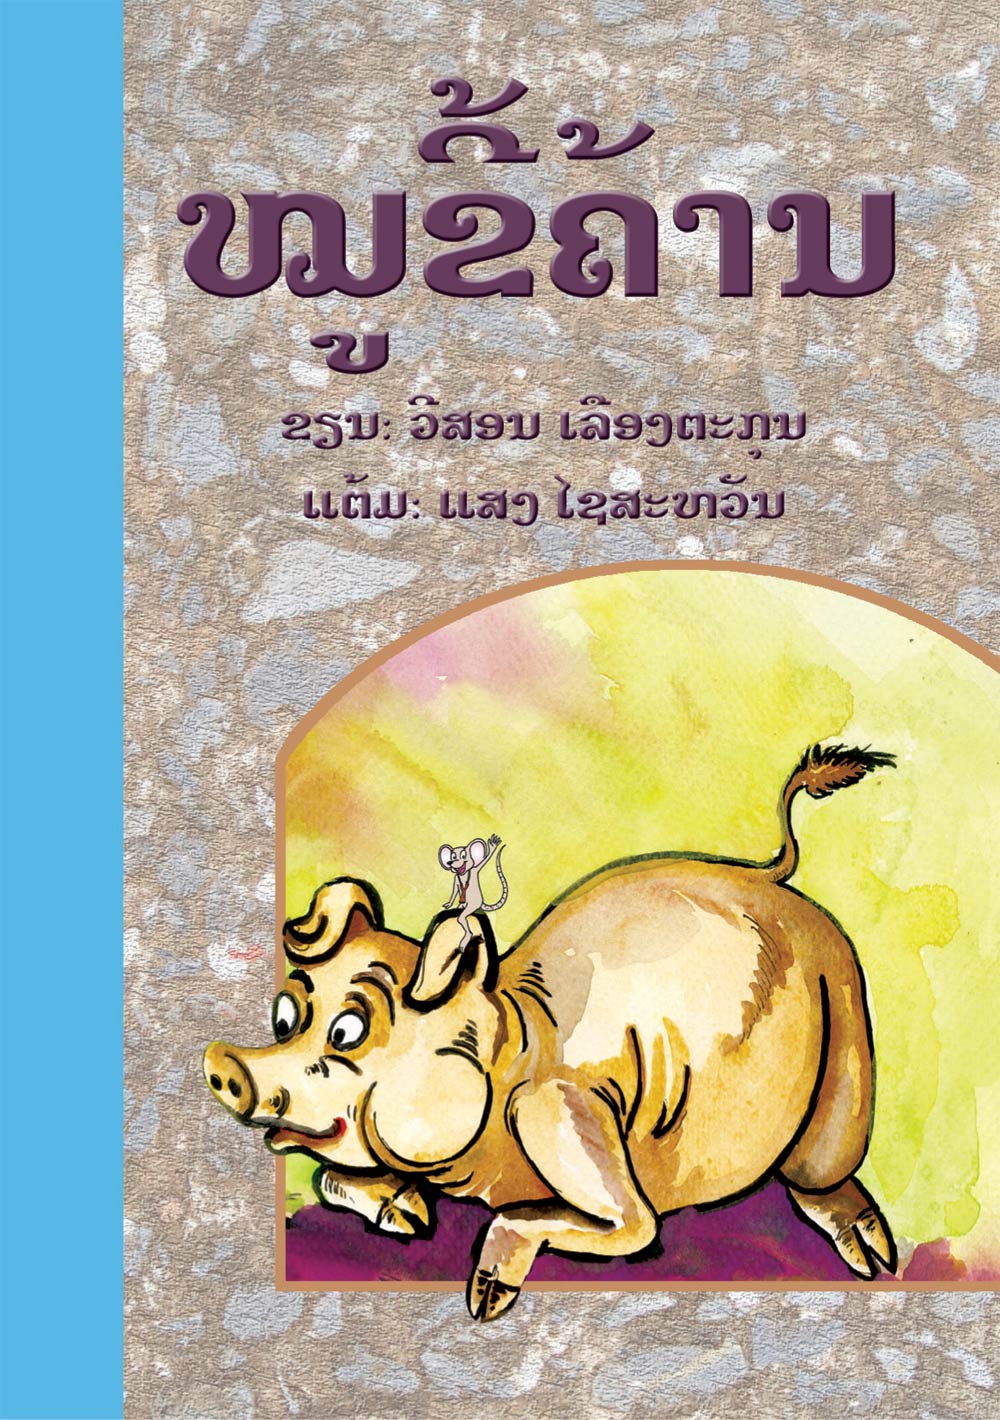 Lazy Pig large book cover, published in Lao language